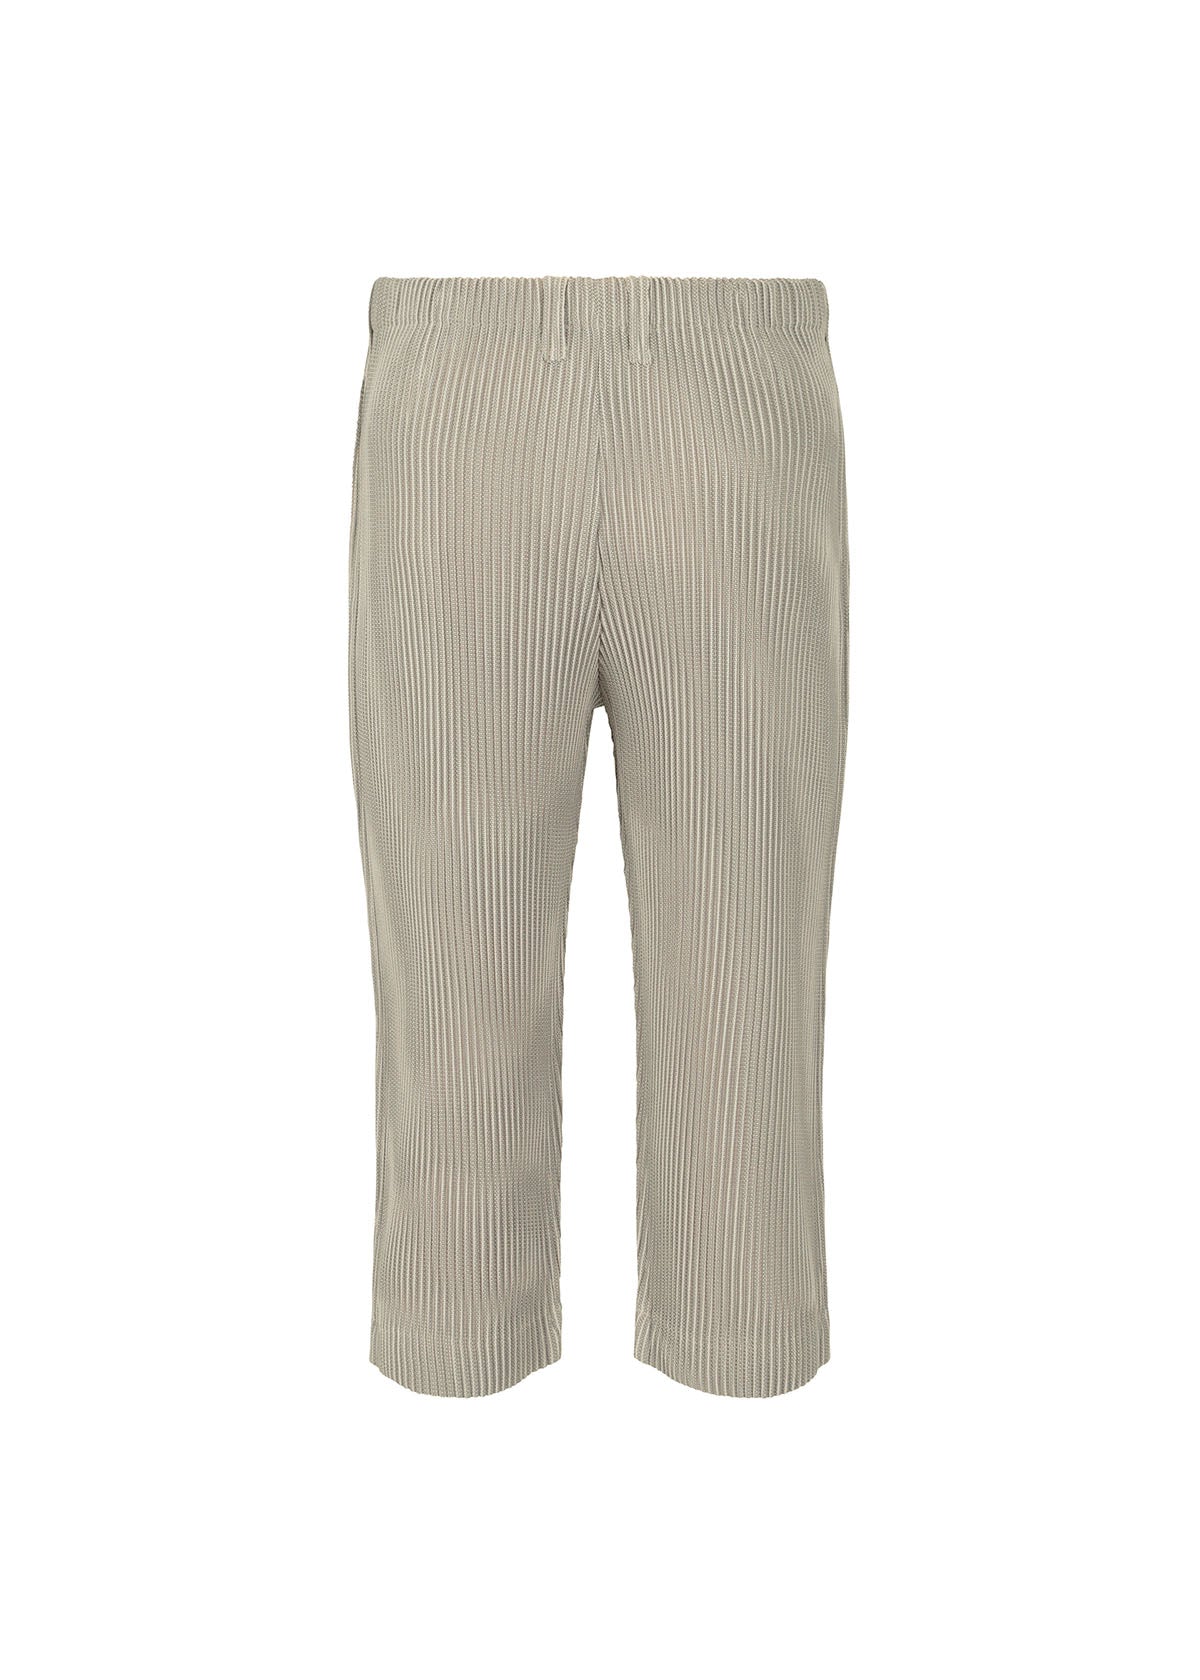 LENO STRIPE PANTS | The official ISSEY MIYAKE ONLINE STORE | ISSEY